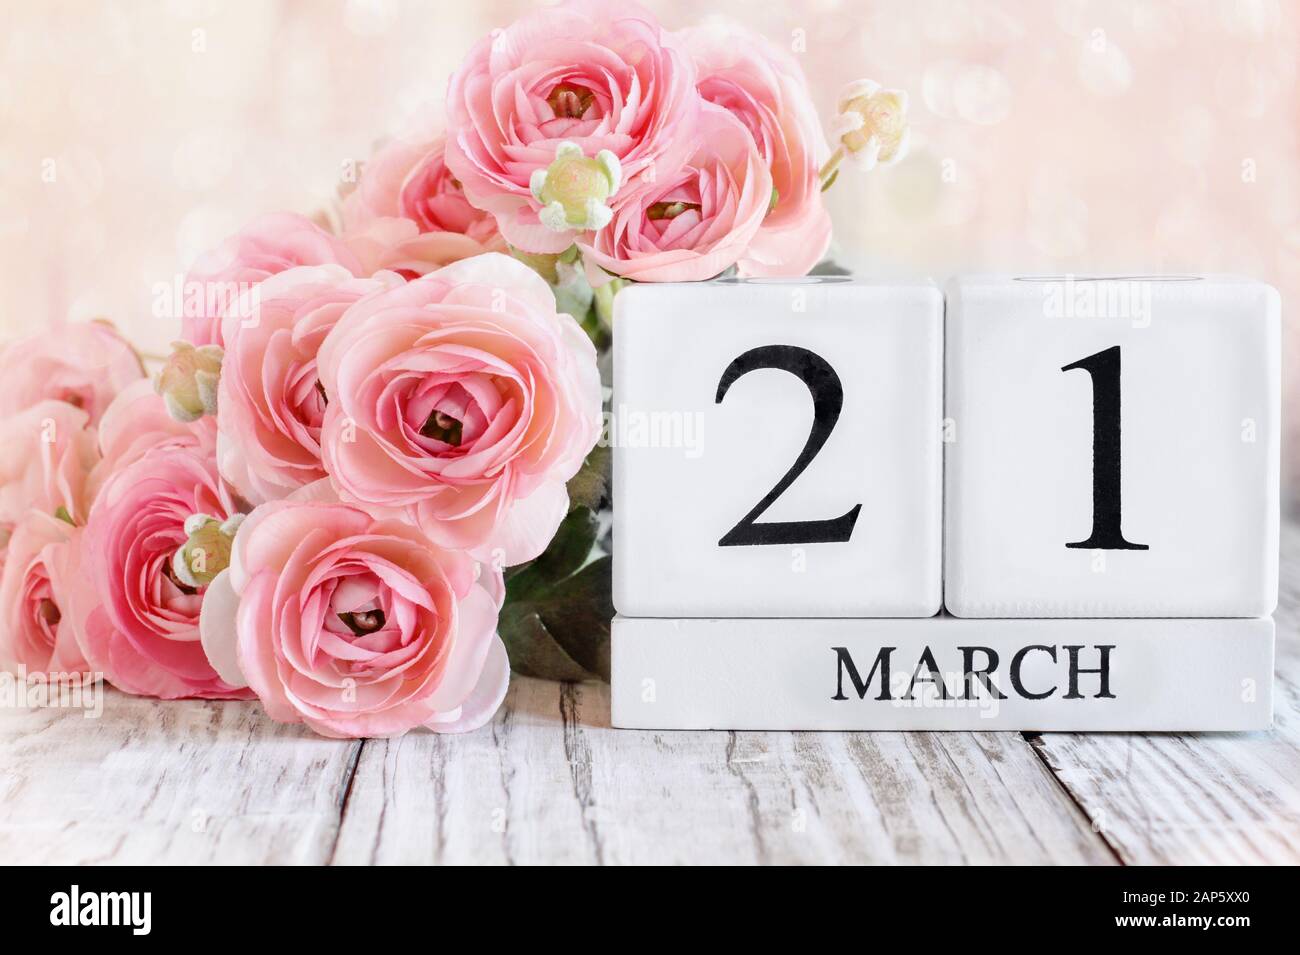 White wood calendar blocks with the date March 21st and pink ranunculus flowers over a wooden table. Selective focus with blurred background. Stock Photo